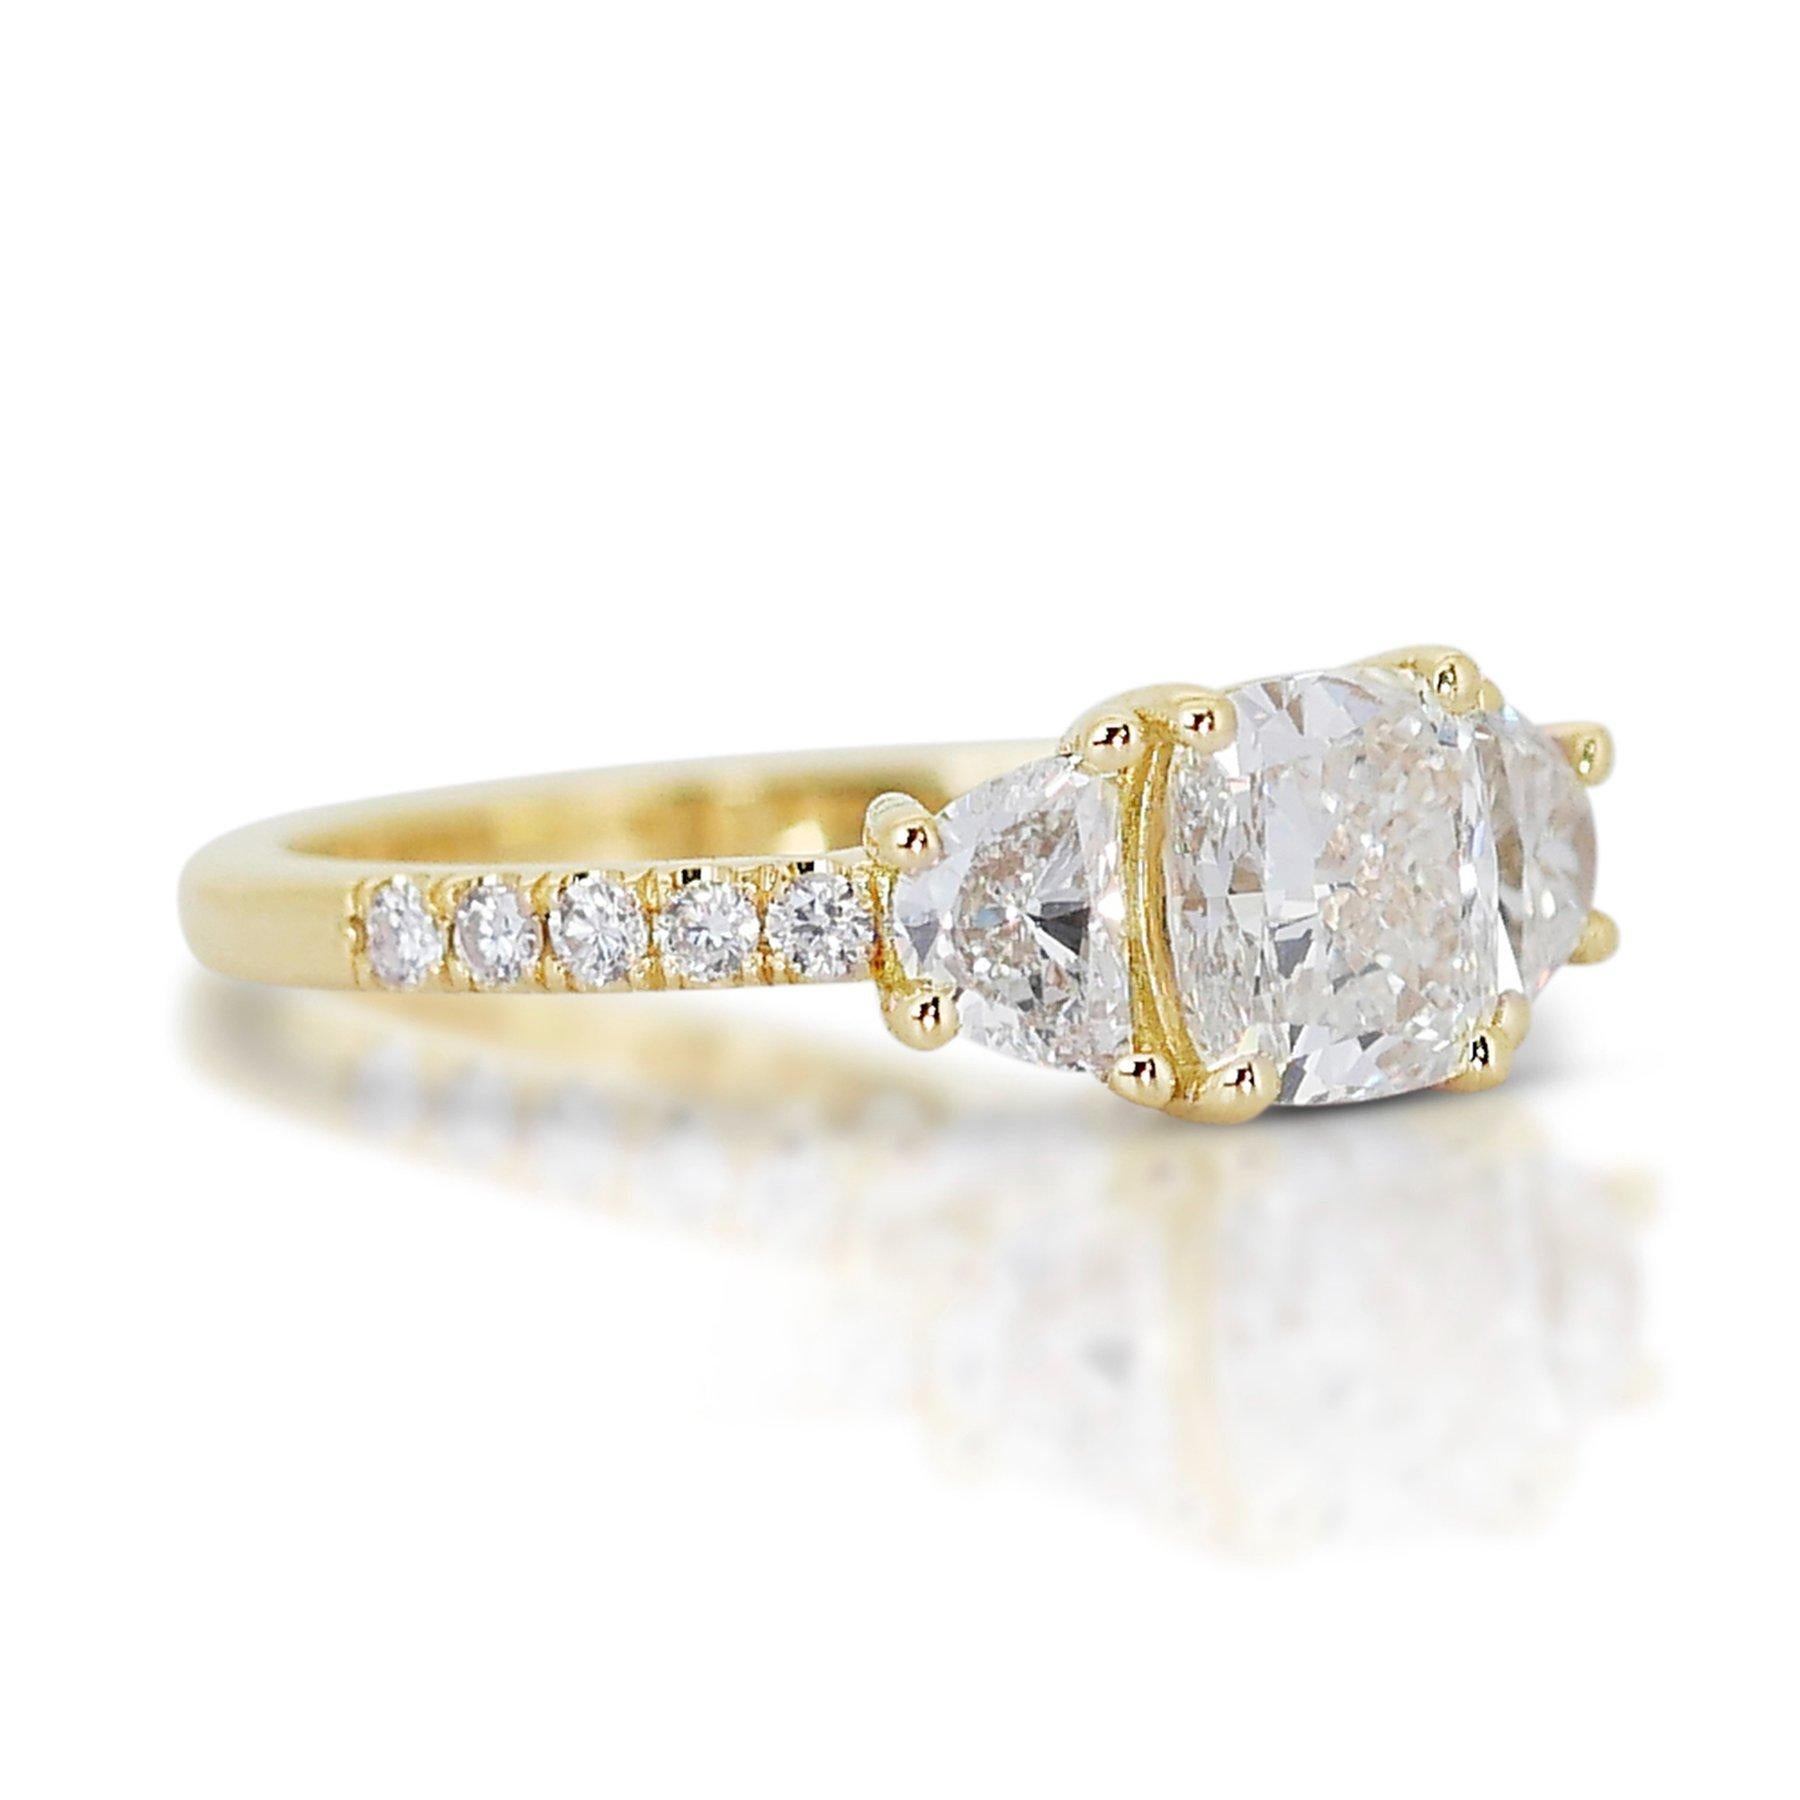 Shining 1.04 ct Cushion Cut Diamond 3 Stone Ring in 18k Yellow Gold – GIA Certified

This sophisticated diamond 3-stone ring in 18k white gold is a showcase of luxury and meticulous design. The centerpiece is a stunning 0.72-carat cushion-cut